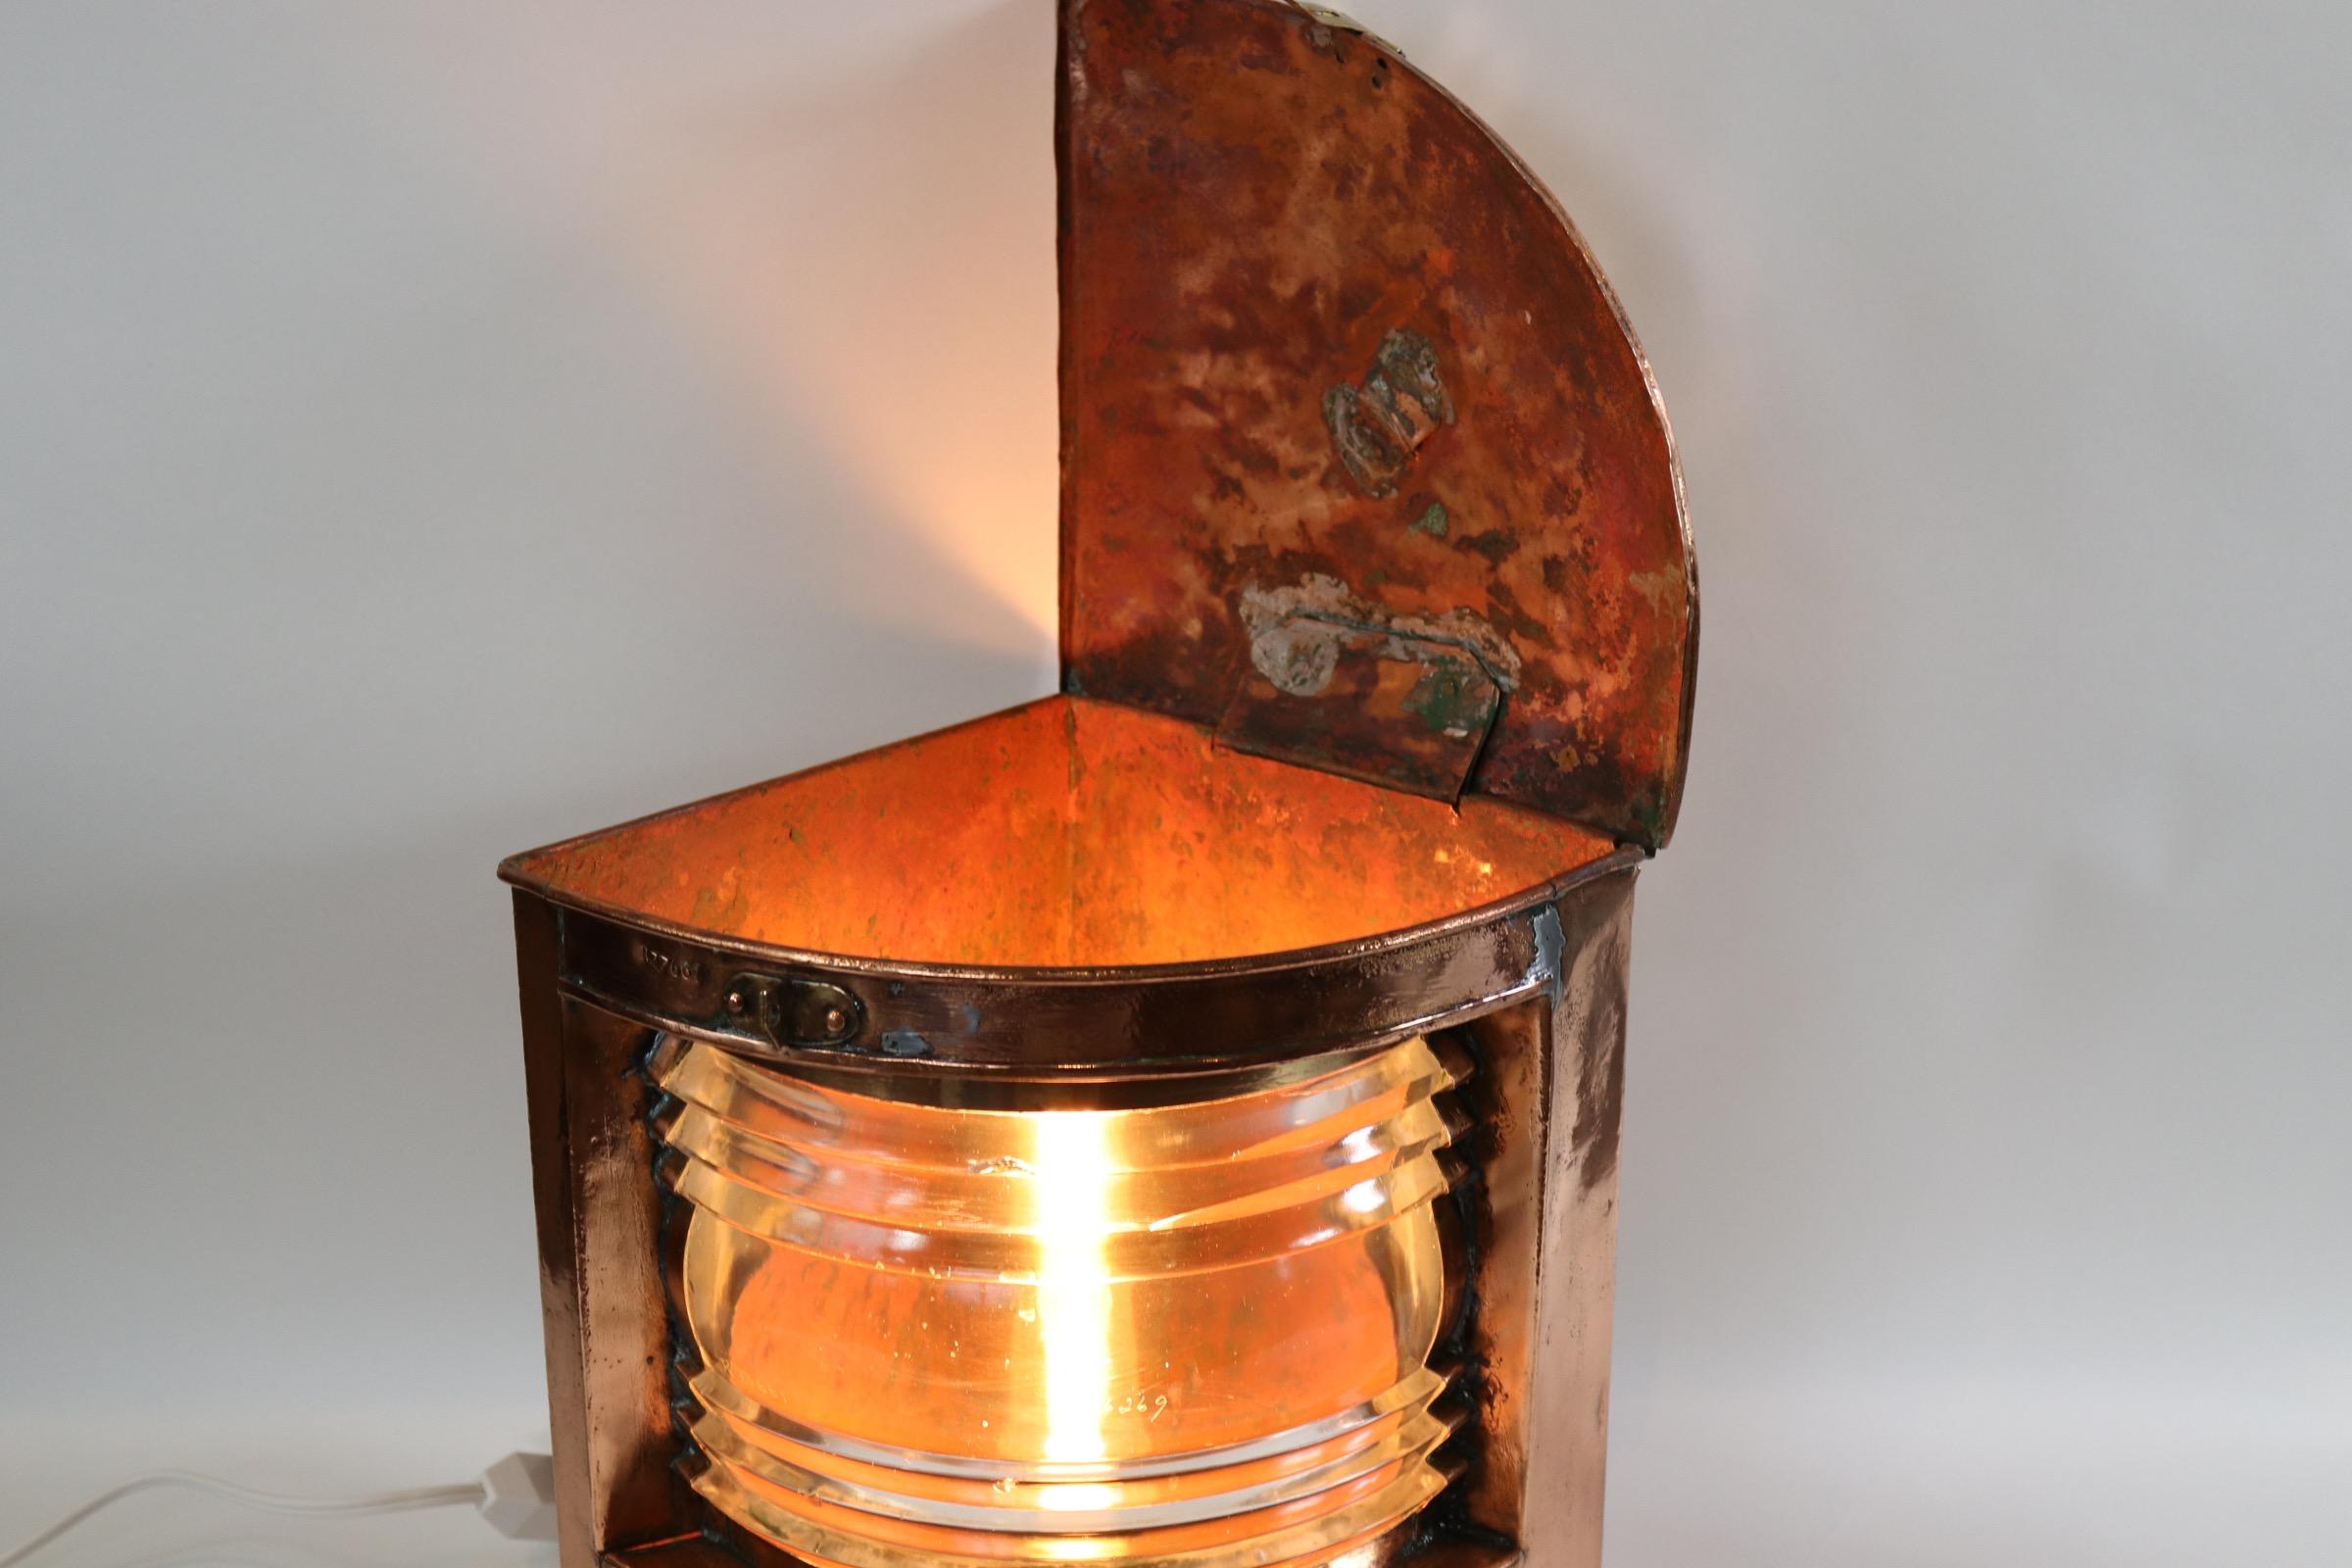 Polished steel ships port lantern with red Fresnel lens, protective cage, sturdy carry handle, mounted to a thick wood base with dark rich finish. Lantern is wired with new socket and wire for home display. Weight is 15 pounds.